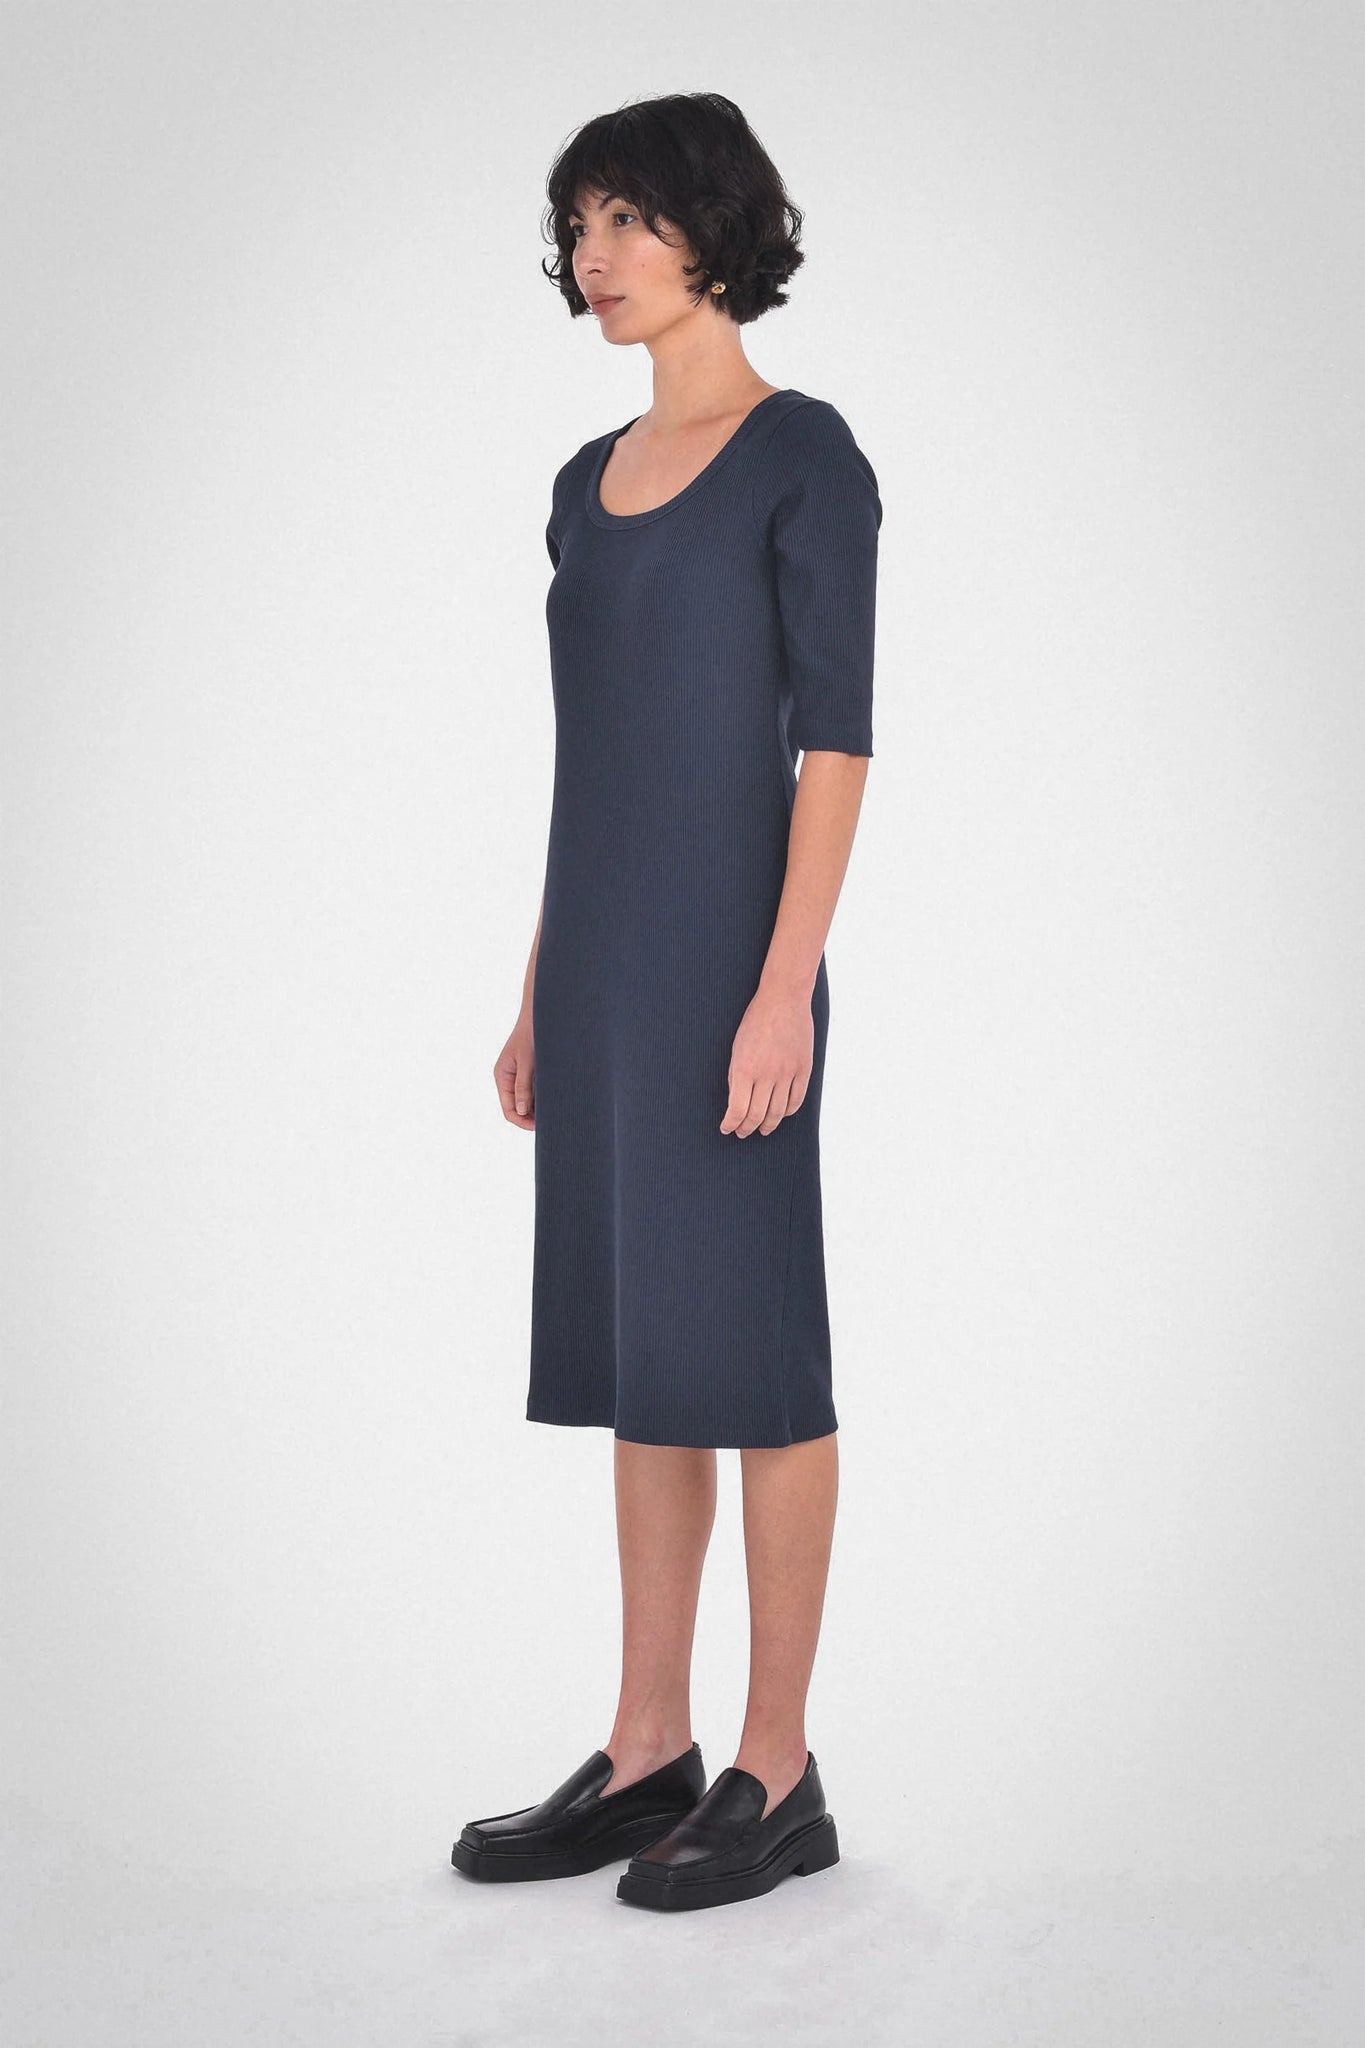 Veronica Dress in Navy From Paper Label available at UniKoncept in Waterloo side view